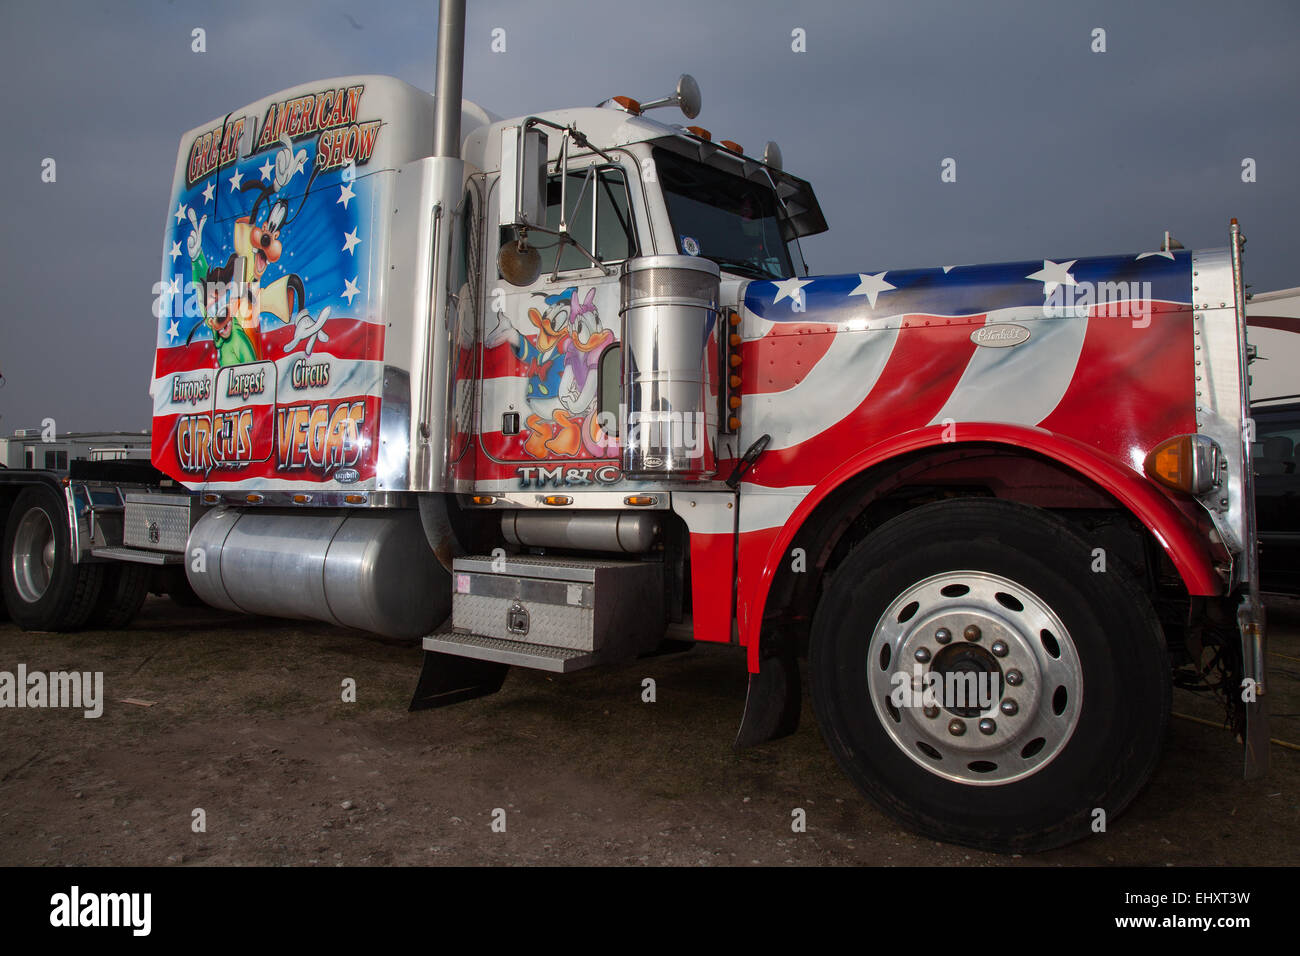 Uncle Sam's American Circus, Custom Painted truck and cab from  USA Peterbilt Trucks in Southport, Merseyside, UK March, 2015.    The all-human circus spectacular, owned by Show Directors John Courtney and Stephen Courtney trading as Circus Vegas has arrived in Southport. The travelling show produced by the famous Uncle Sam's Great American Circus tours for ten months a year.  It is an Irish organisation, a star-spangled selection of Americana. US, Kenworth heavy-duty vehicles and Peterbilt HGV art monster decorated trucks look the part when they roll into town, Stock Photo